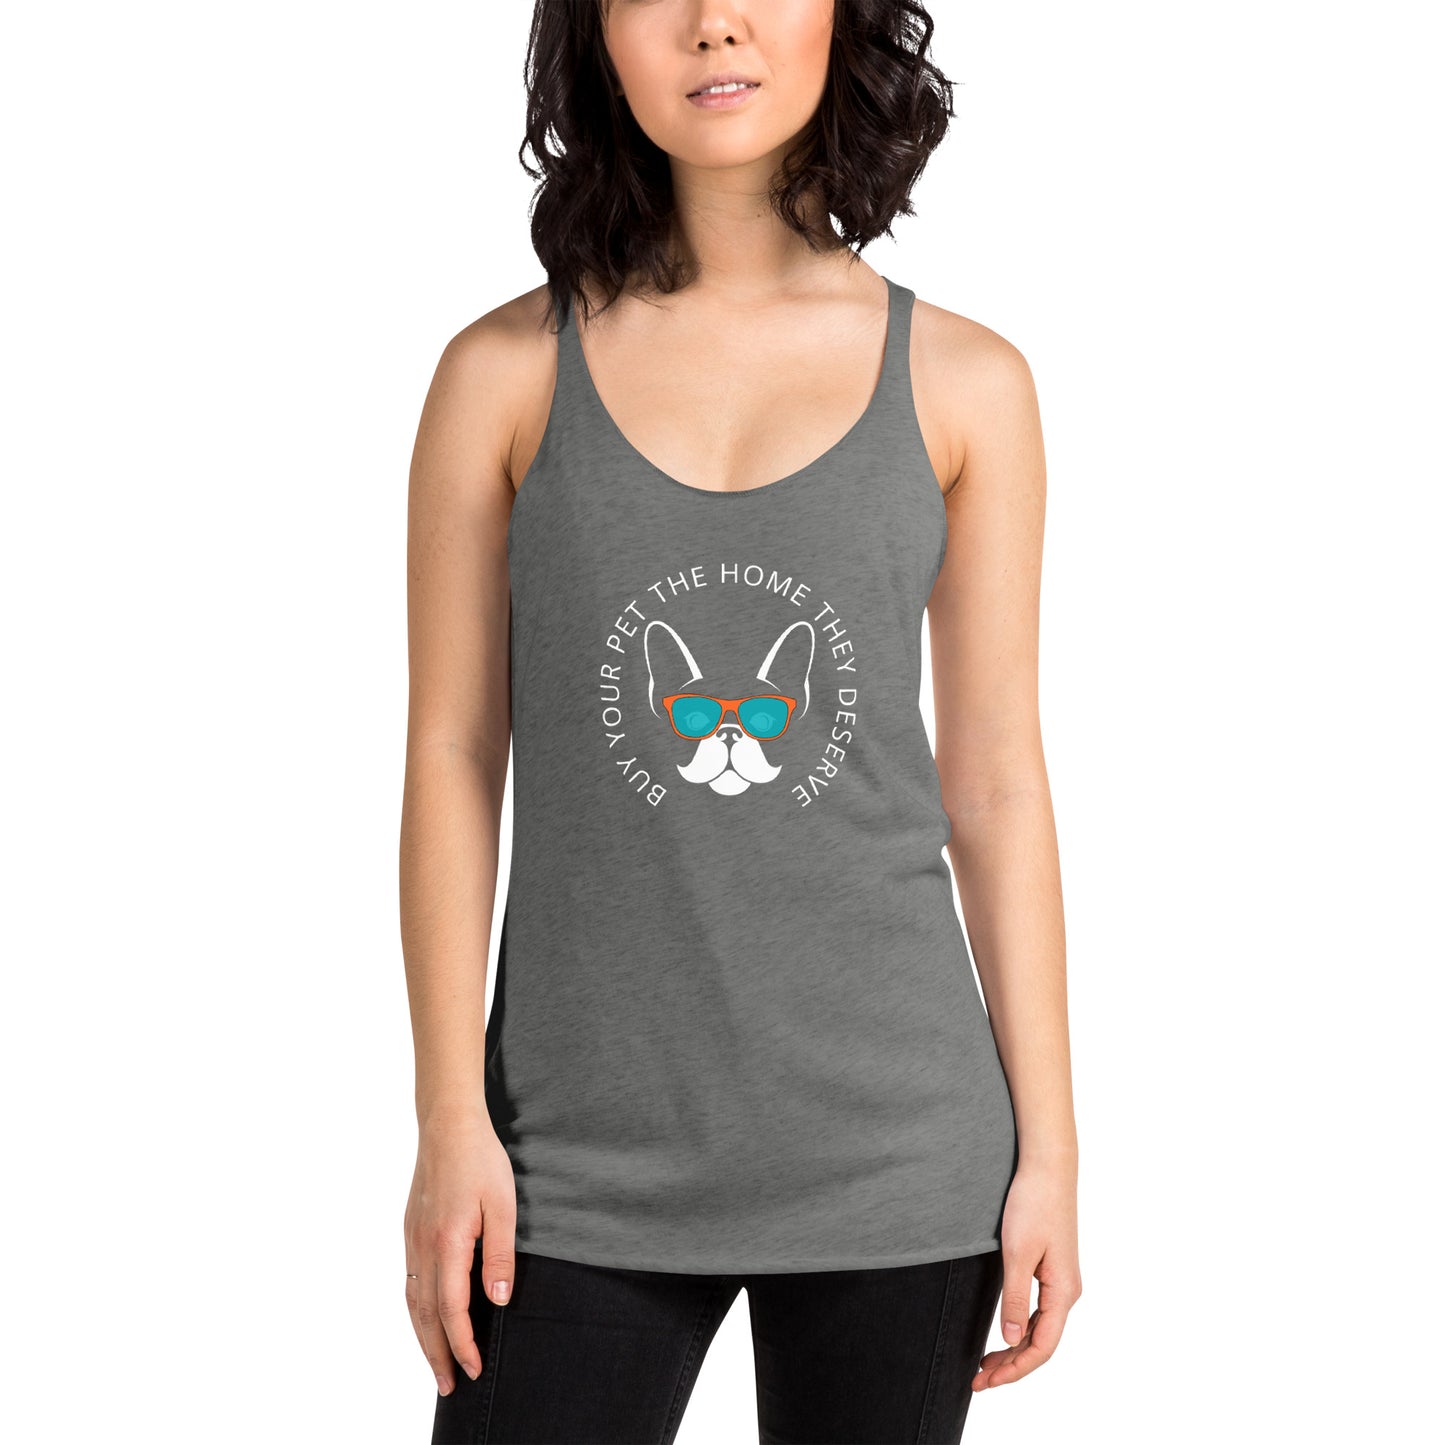 Buy Your Pet the Home They Deserve Women's Racerback Tank